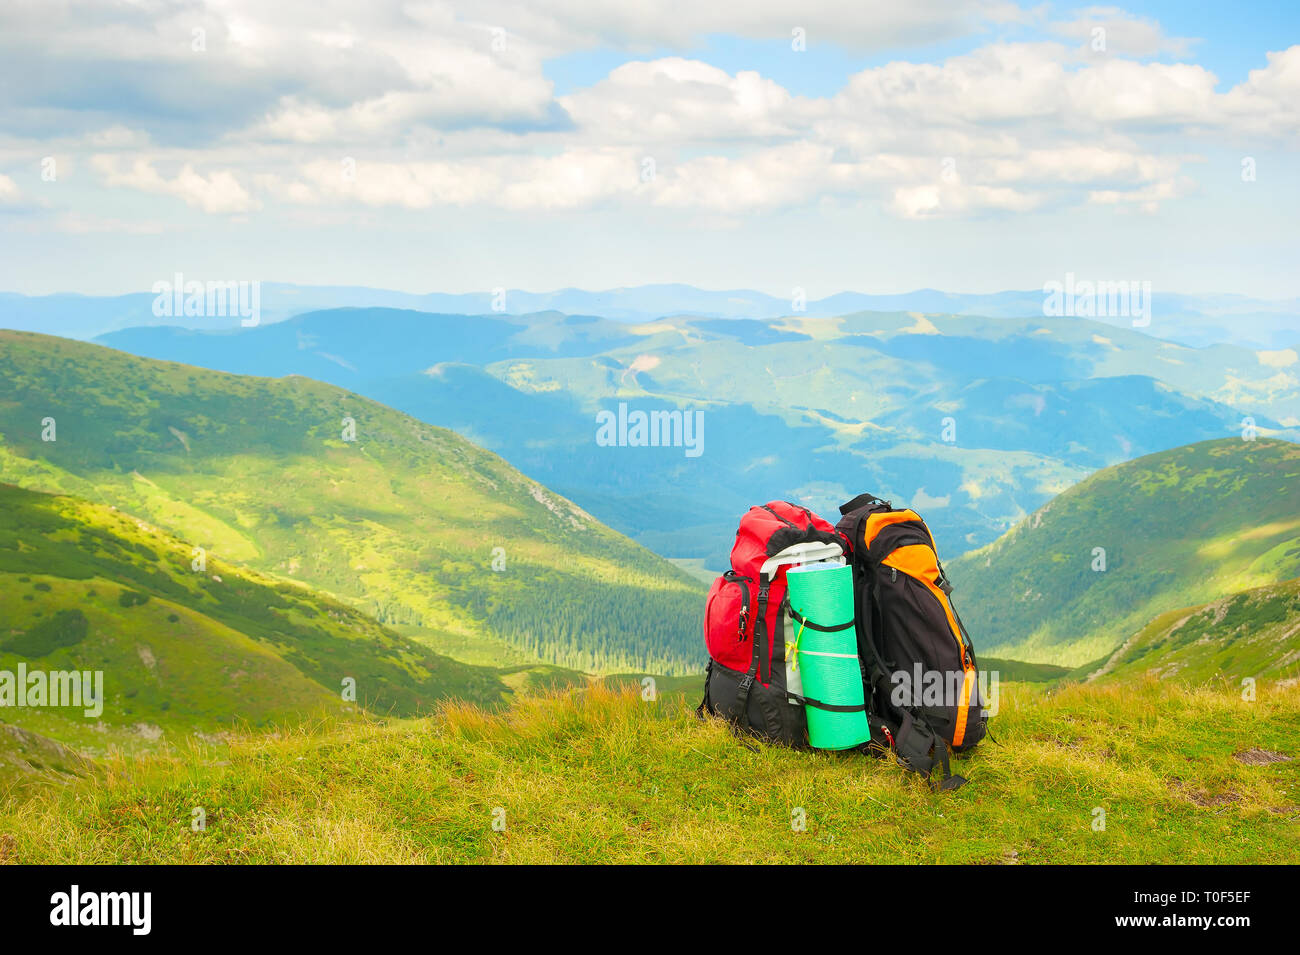 Two colorful hikers backpacks on green slope, scenic Carpathian mountains landscape in background, Ukraine Stock Photo